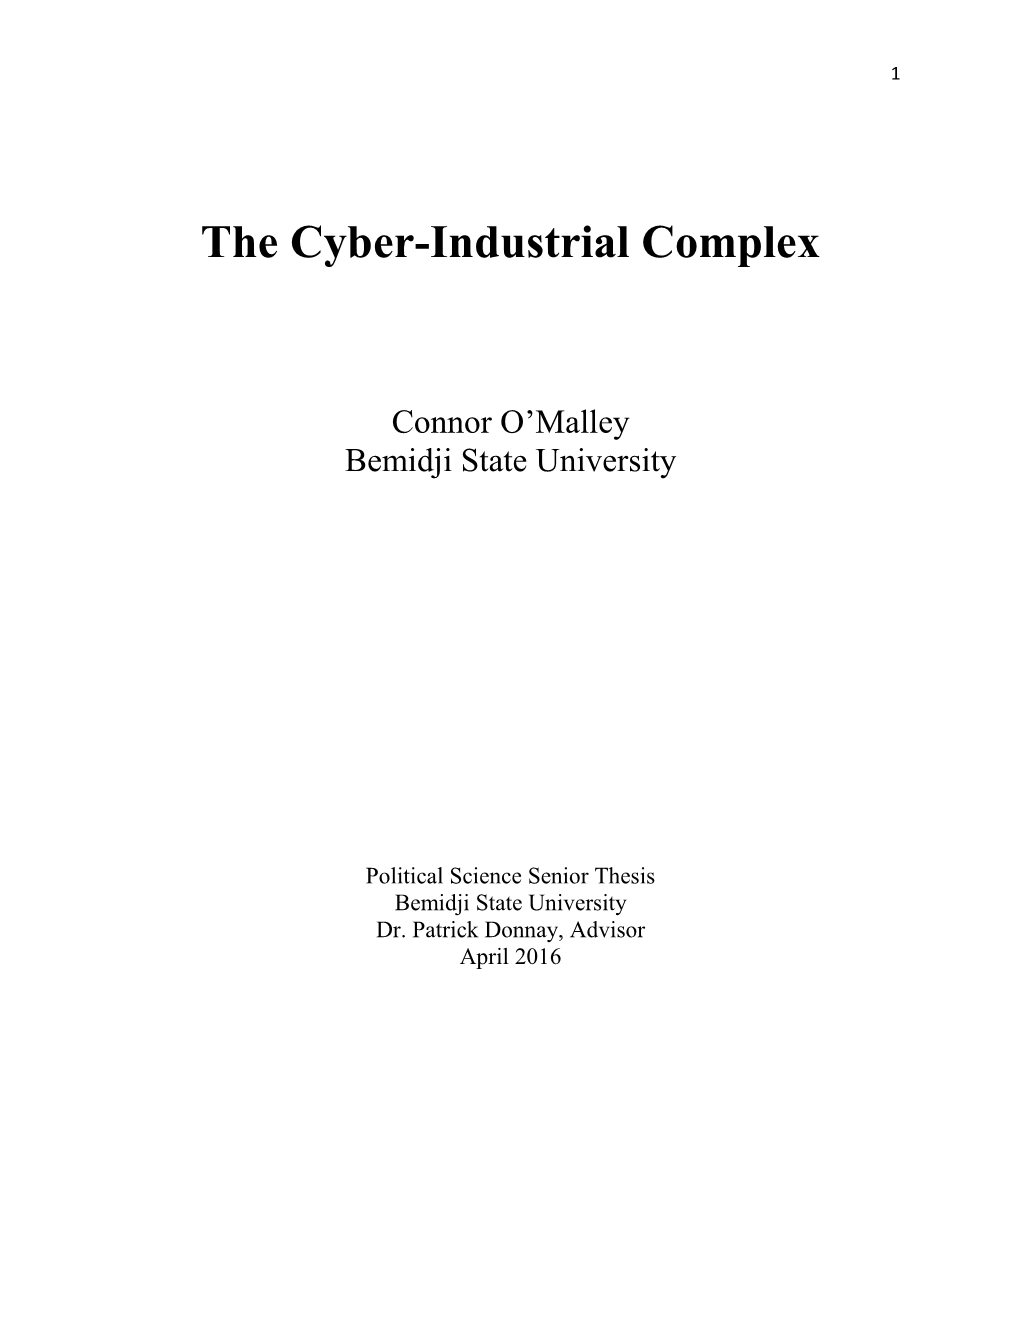 Connor O'malley – the Cyber Industrial Complex